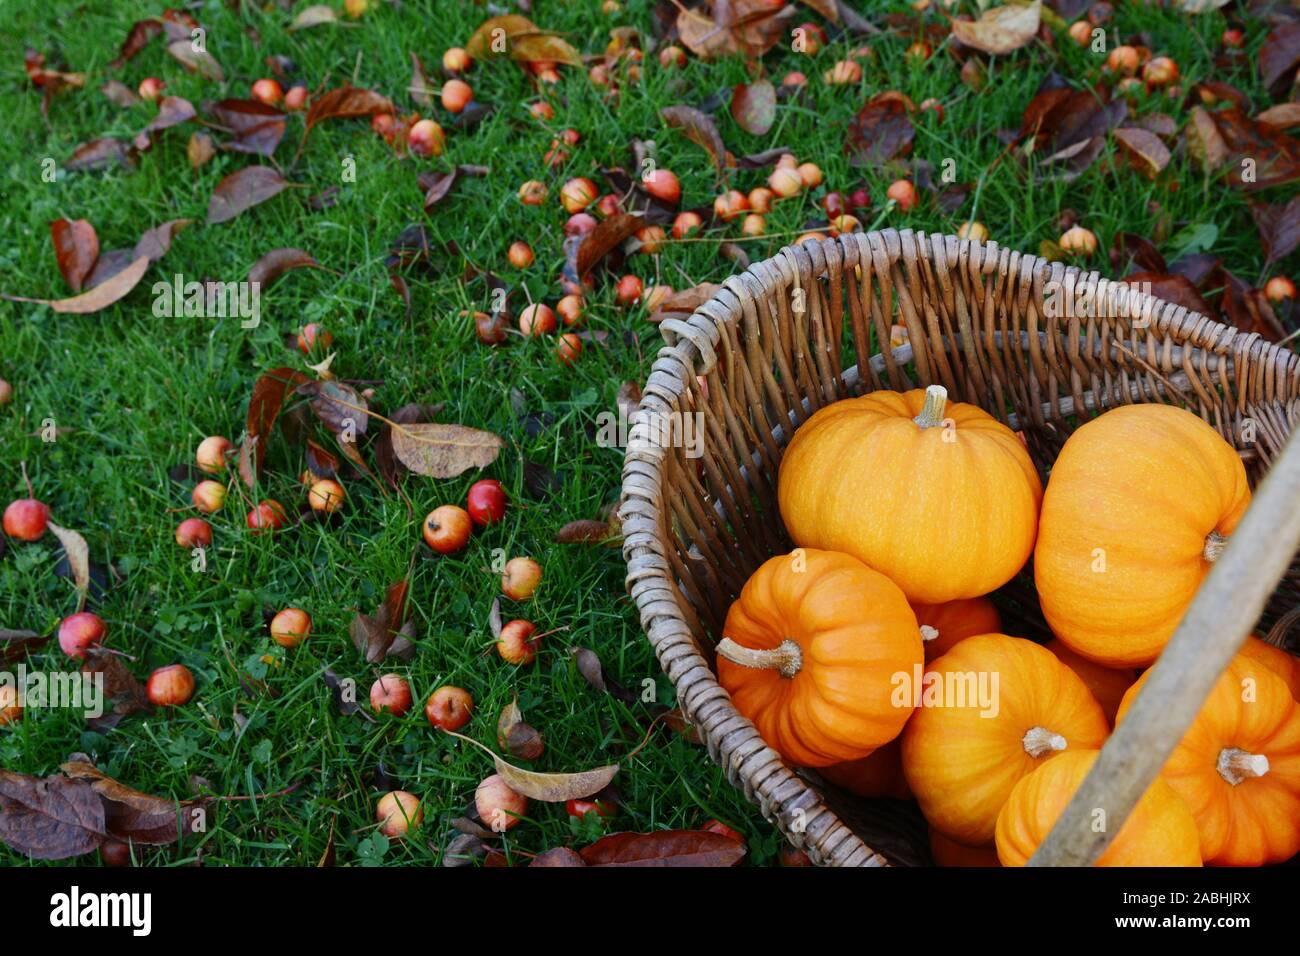 Rustic basket of mini orange pumpkins for Thanksgiving decorations on a lawn covered with fallen crab apples and autumn leaves Stock Photo